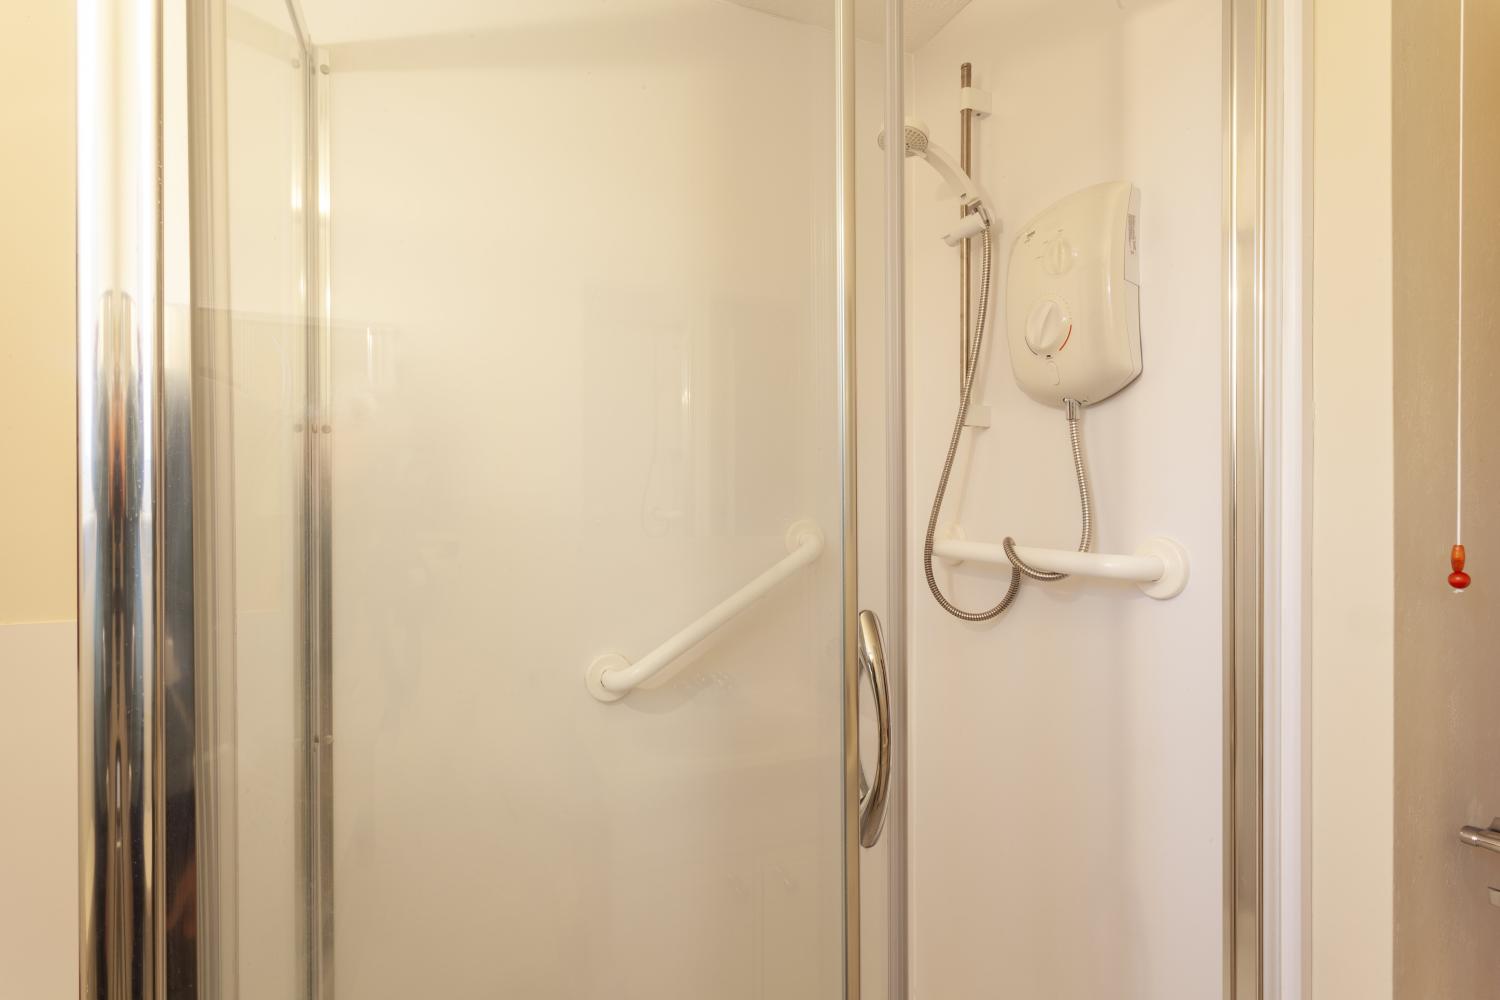 Large electric shower cubicle